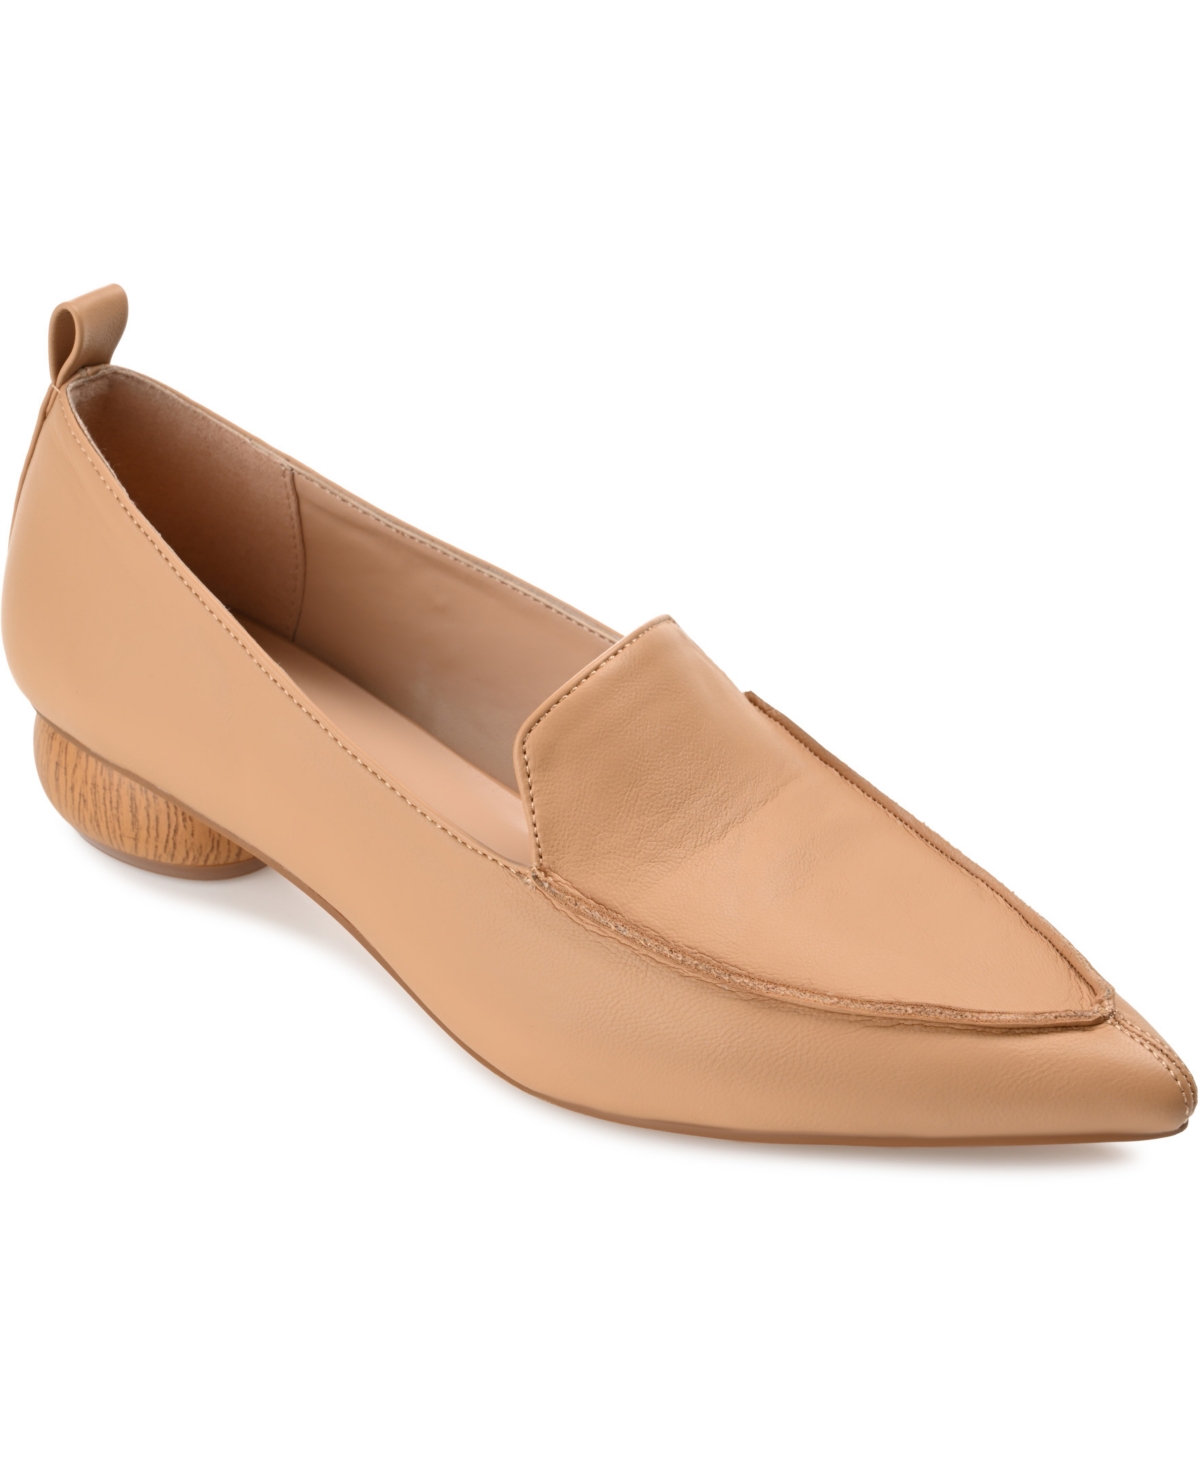 Women's Maggs Pointed Toe Loafers - Taupe